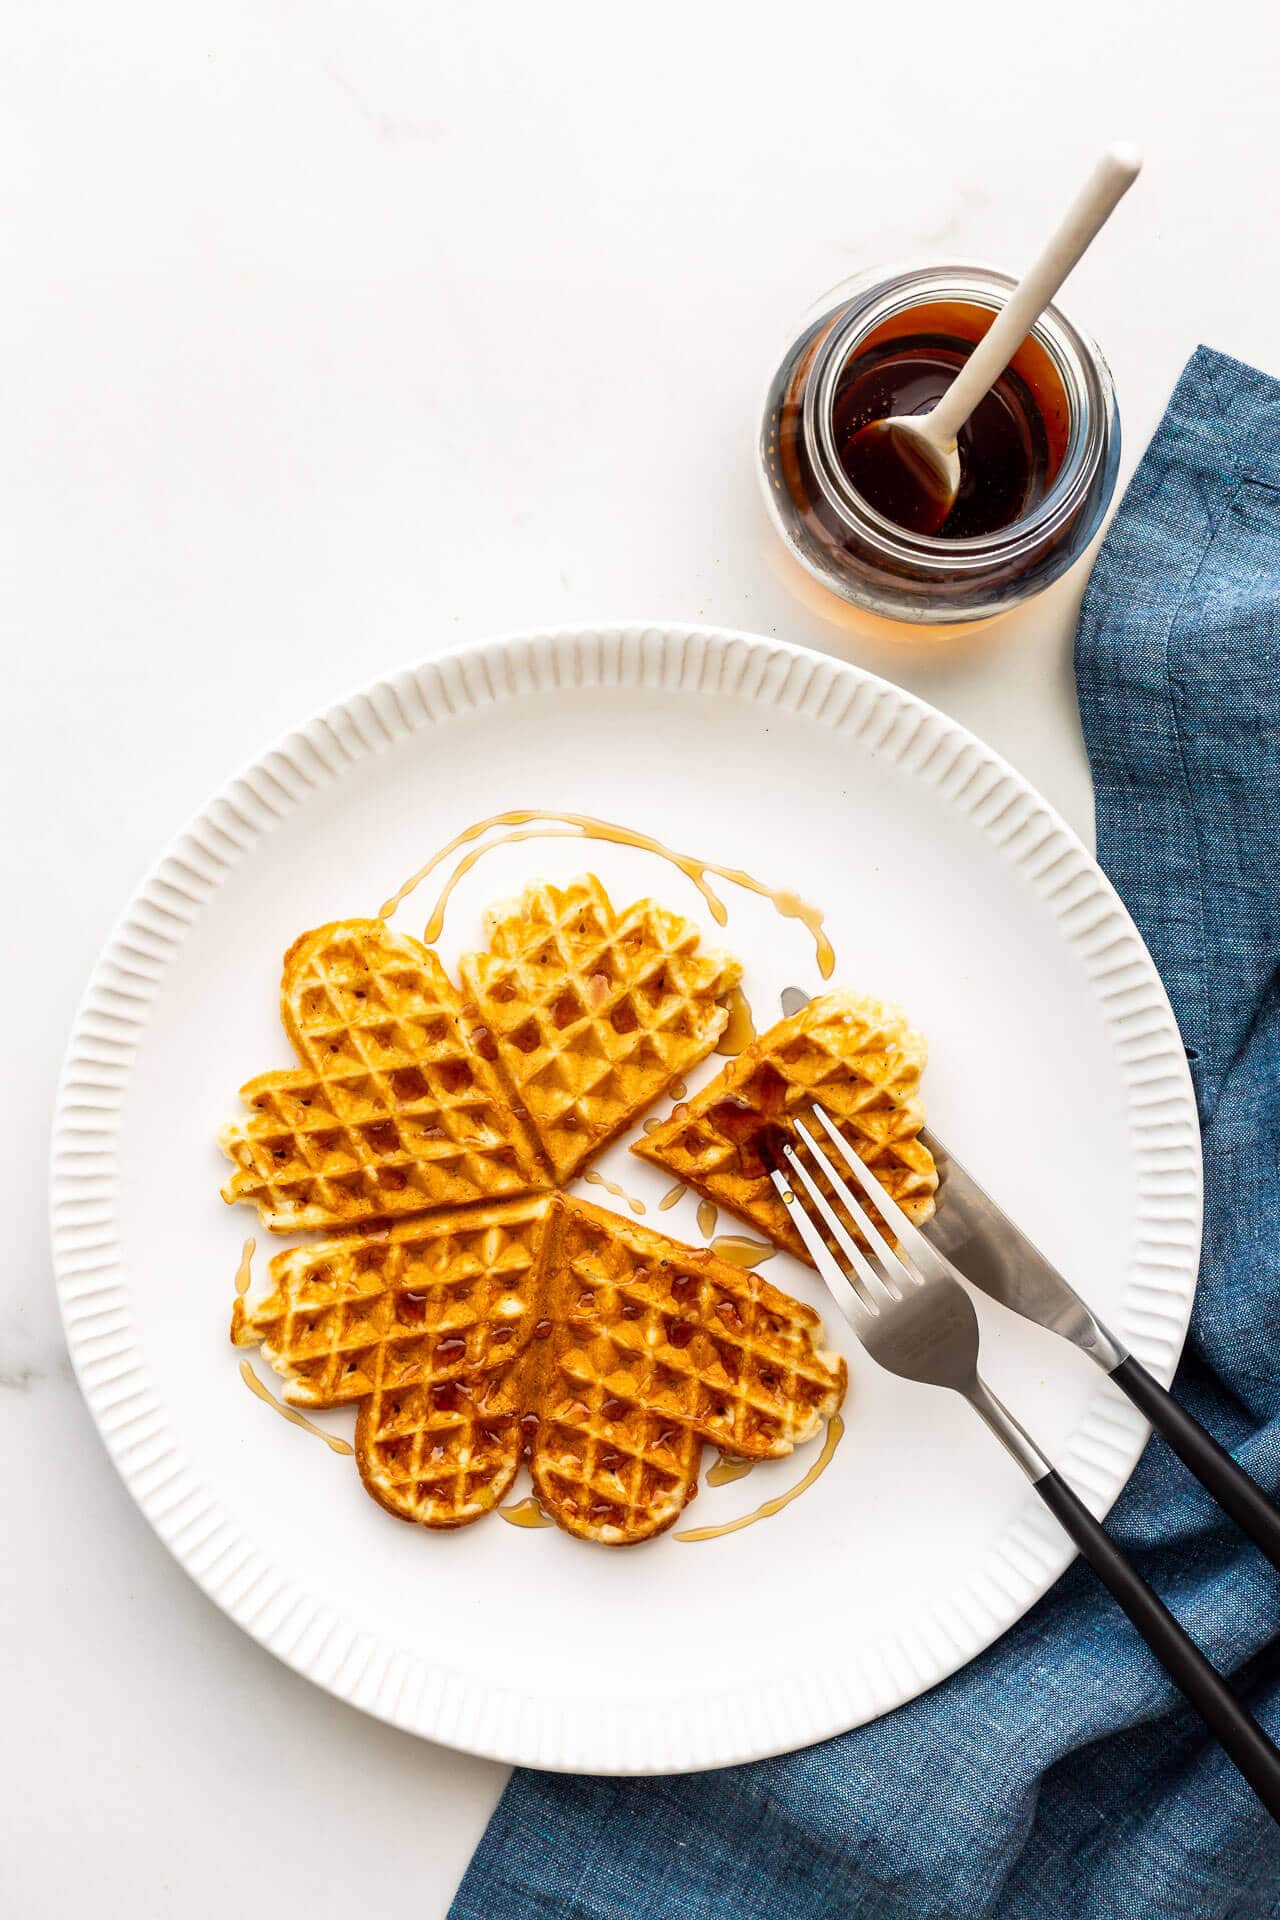 Waffle on a white plate with maple syrup and a blue linen napkin.